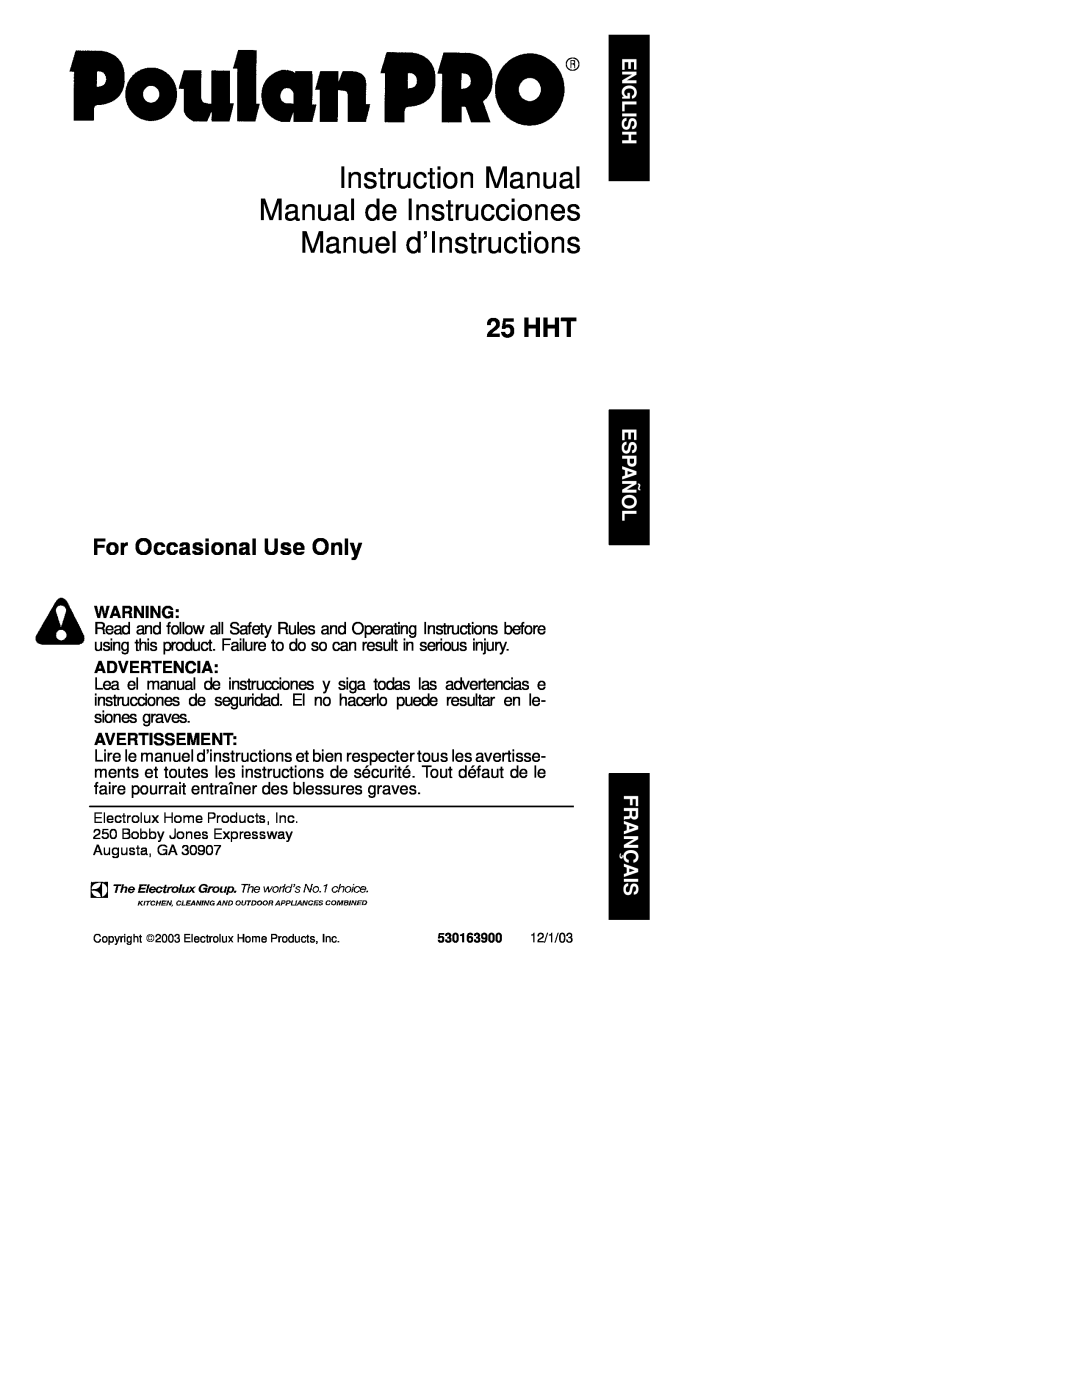 Poulan 25 HHT instruction manual Advertencia, Avertissement, For Occasional Use Only 